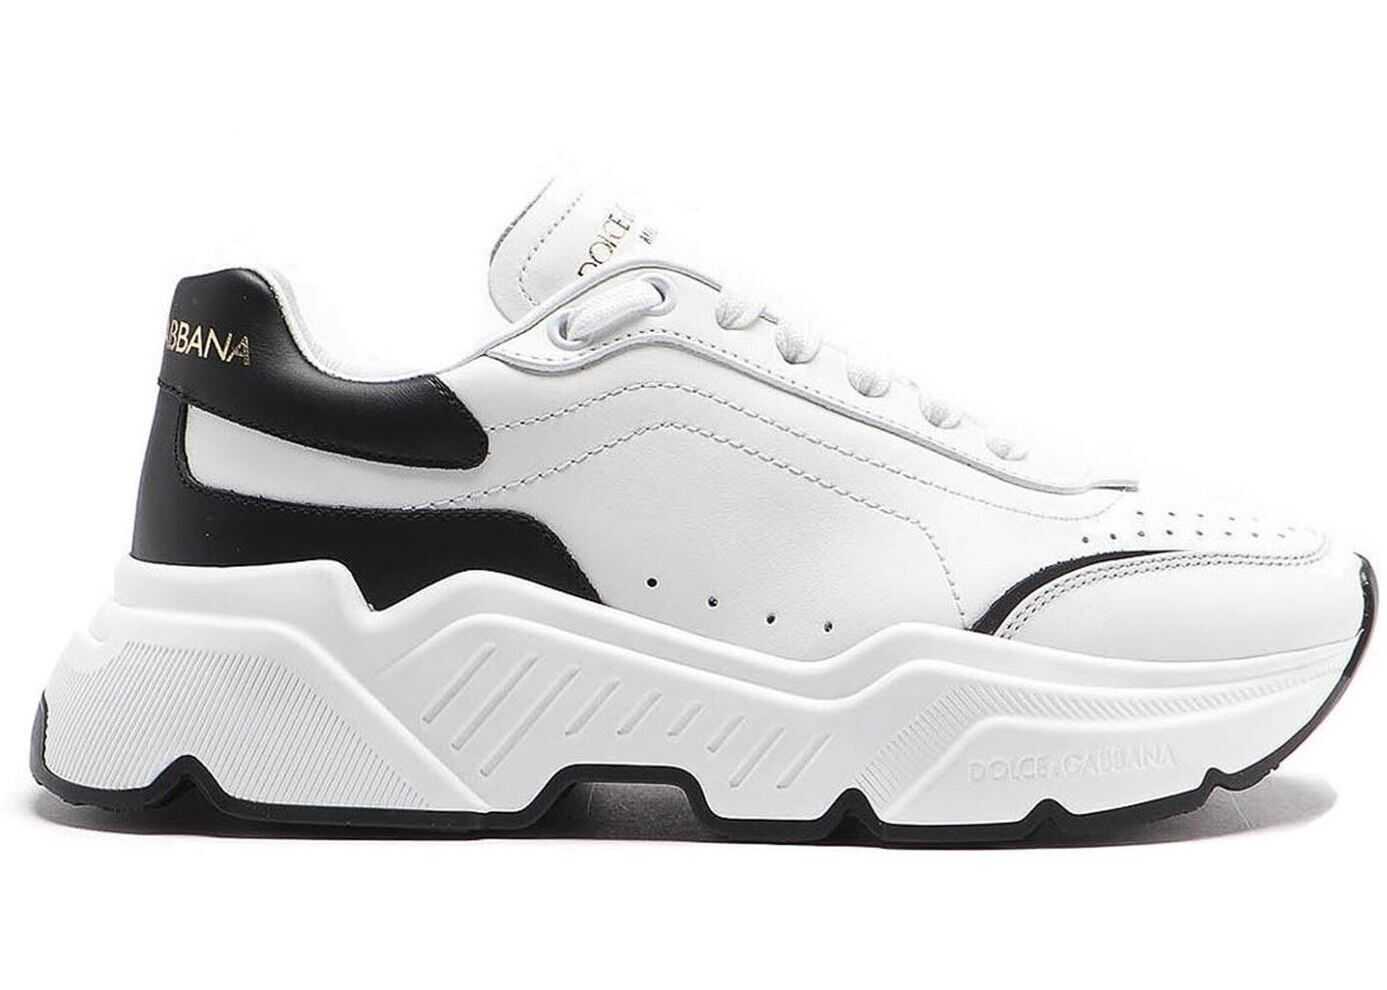 Dolce & Gabbana Daymaster Sneakers In White And Black CK1791 AX589 89697 White